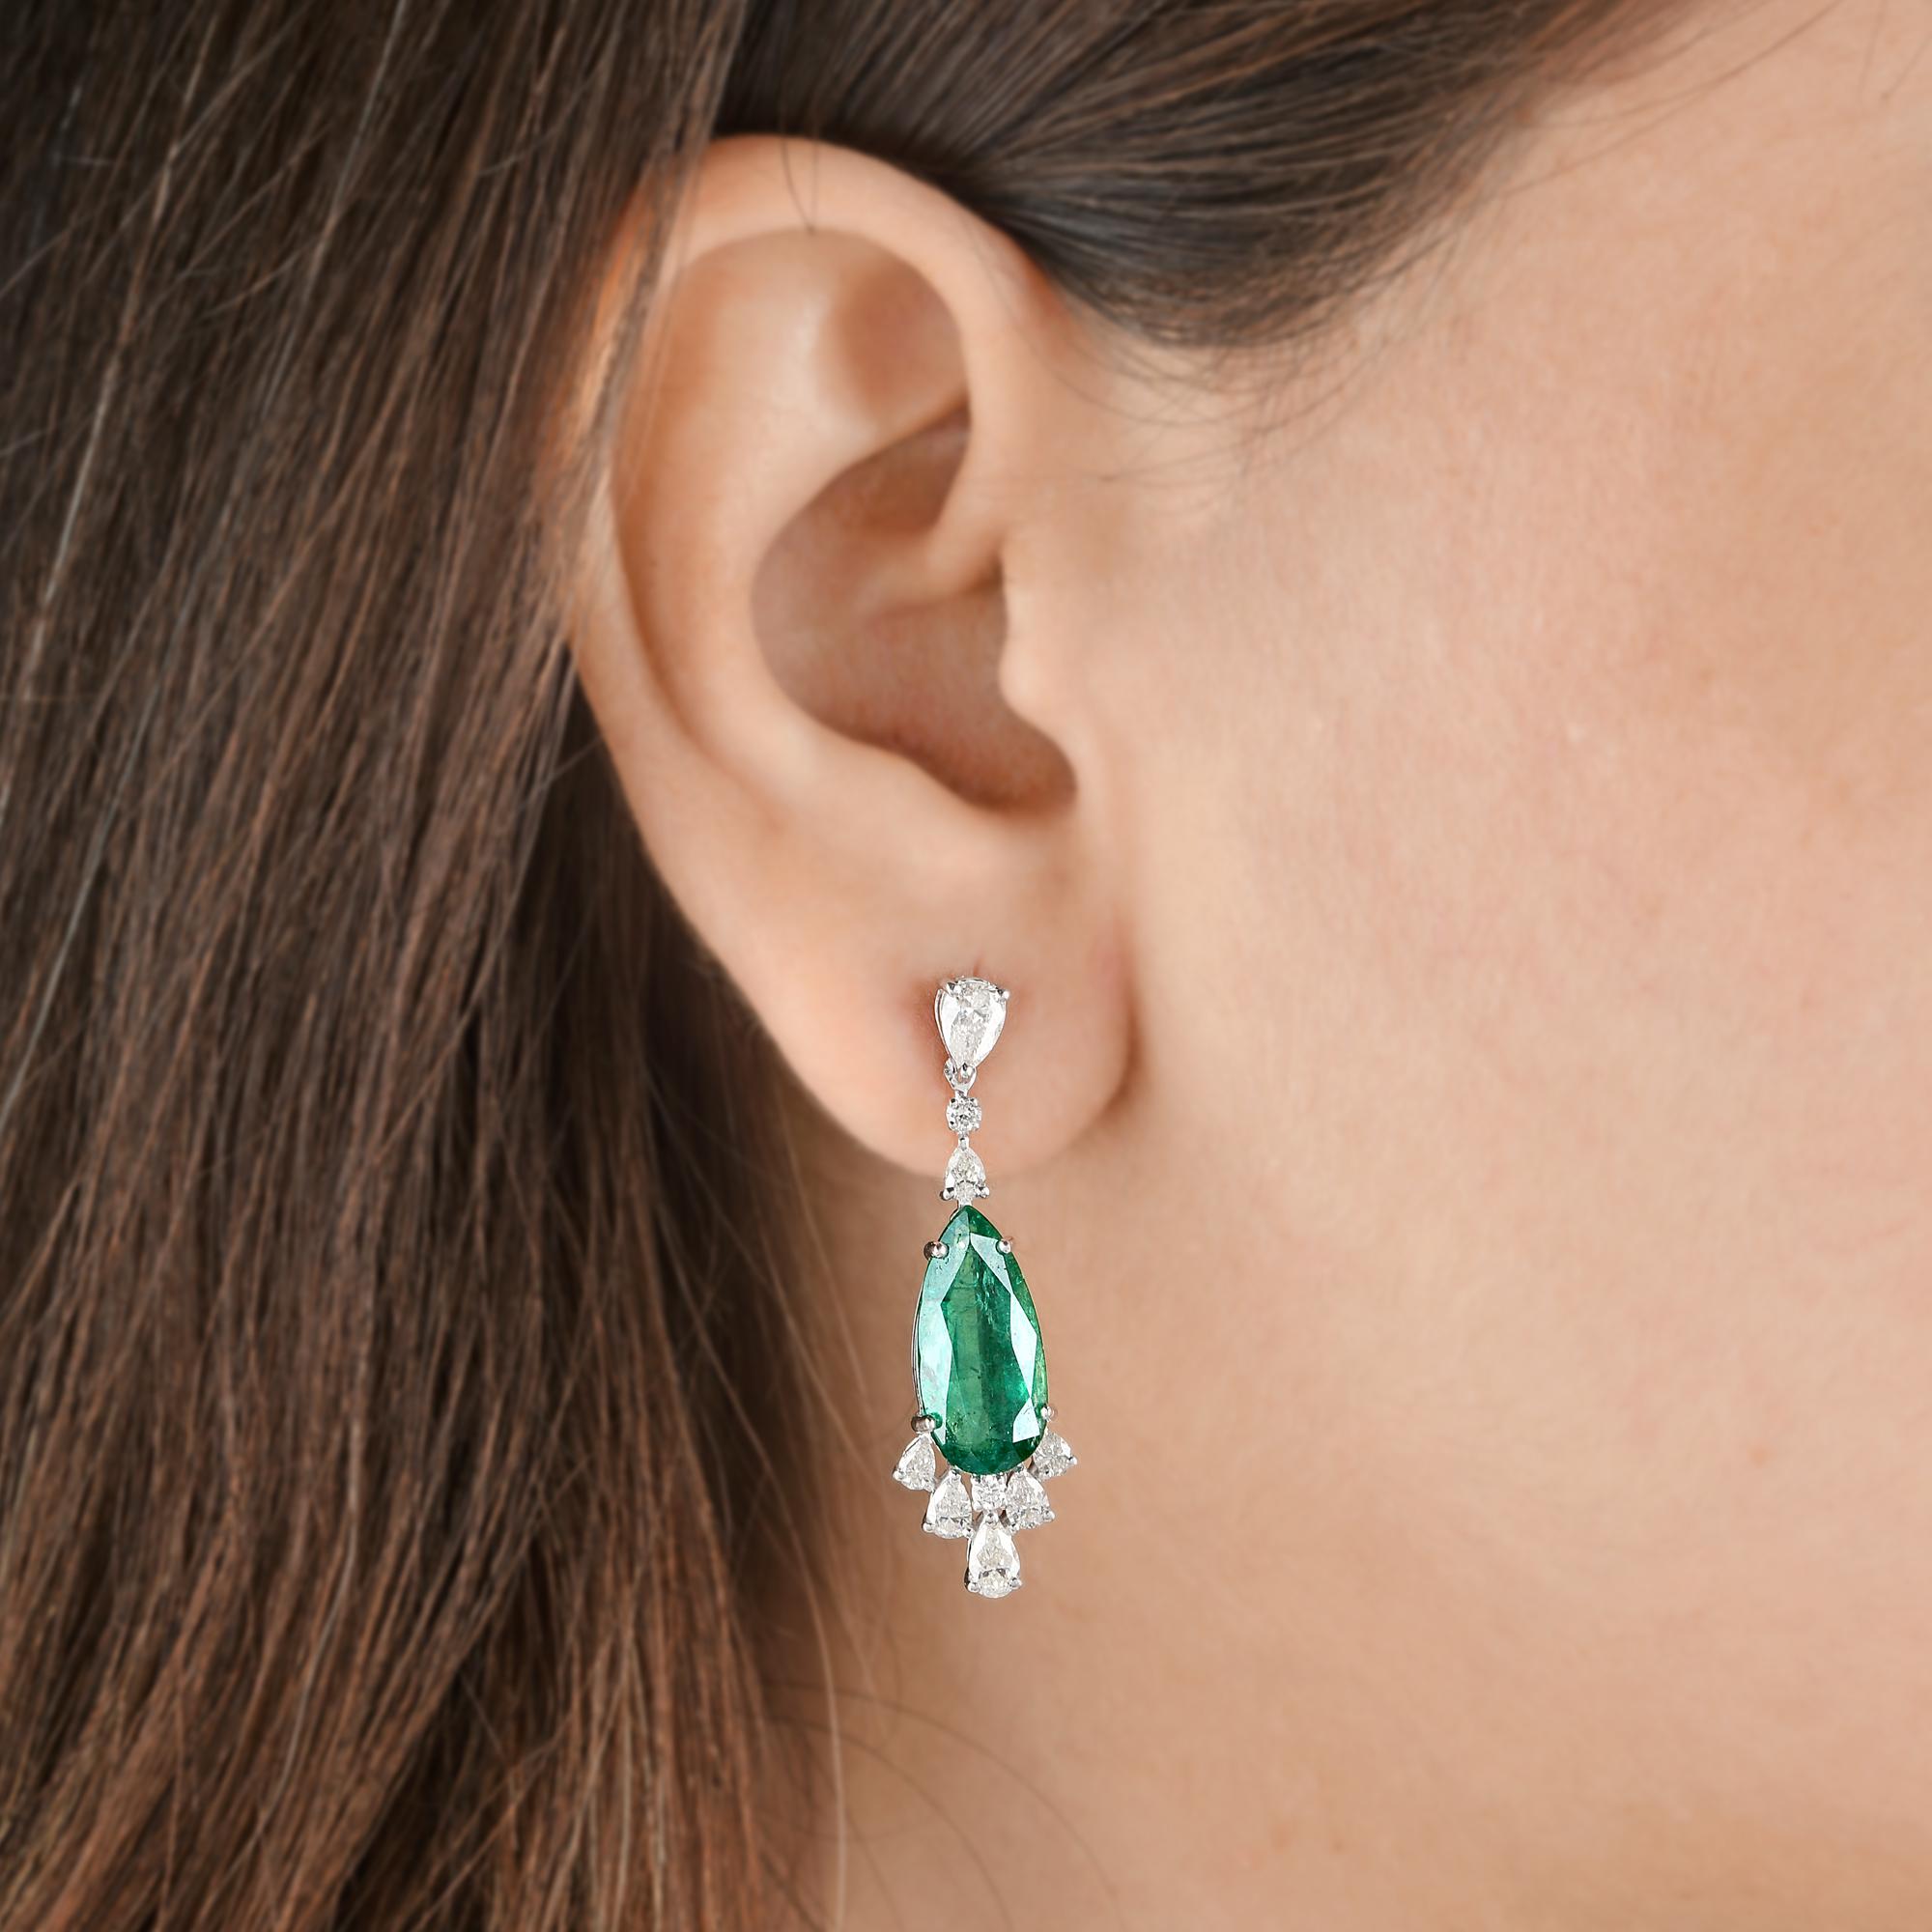 Pear Cut Pear Natural Emerald Gemstone Dangle Earrings Diamond 18 Kt White Gold Jewelry For Sale